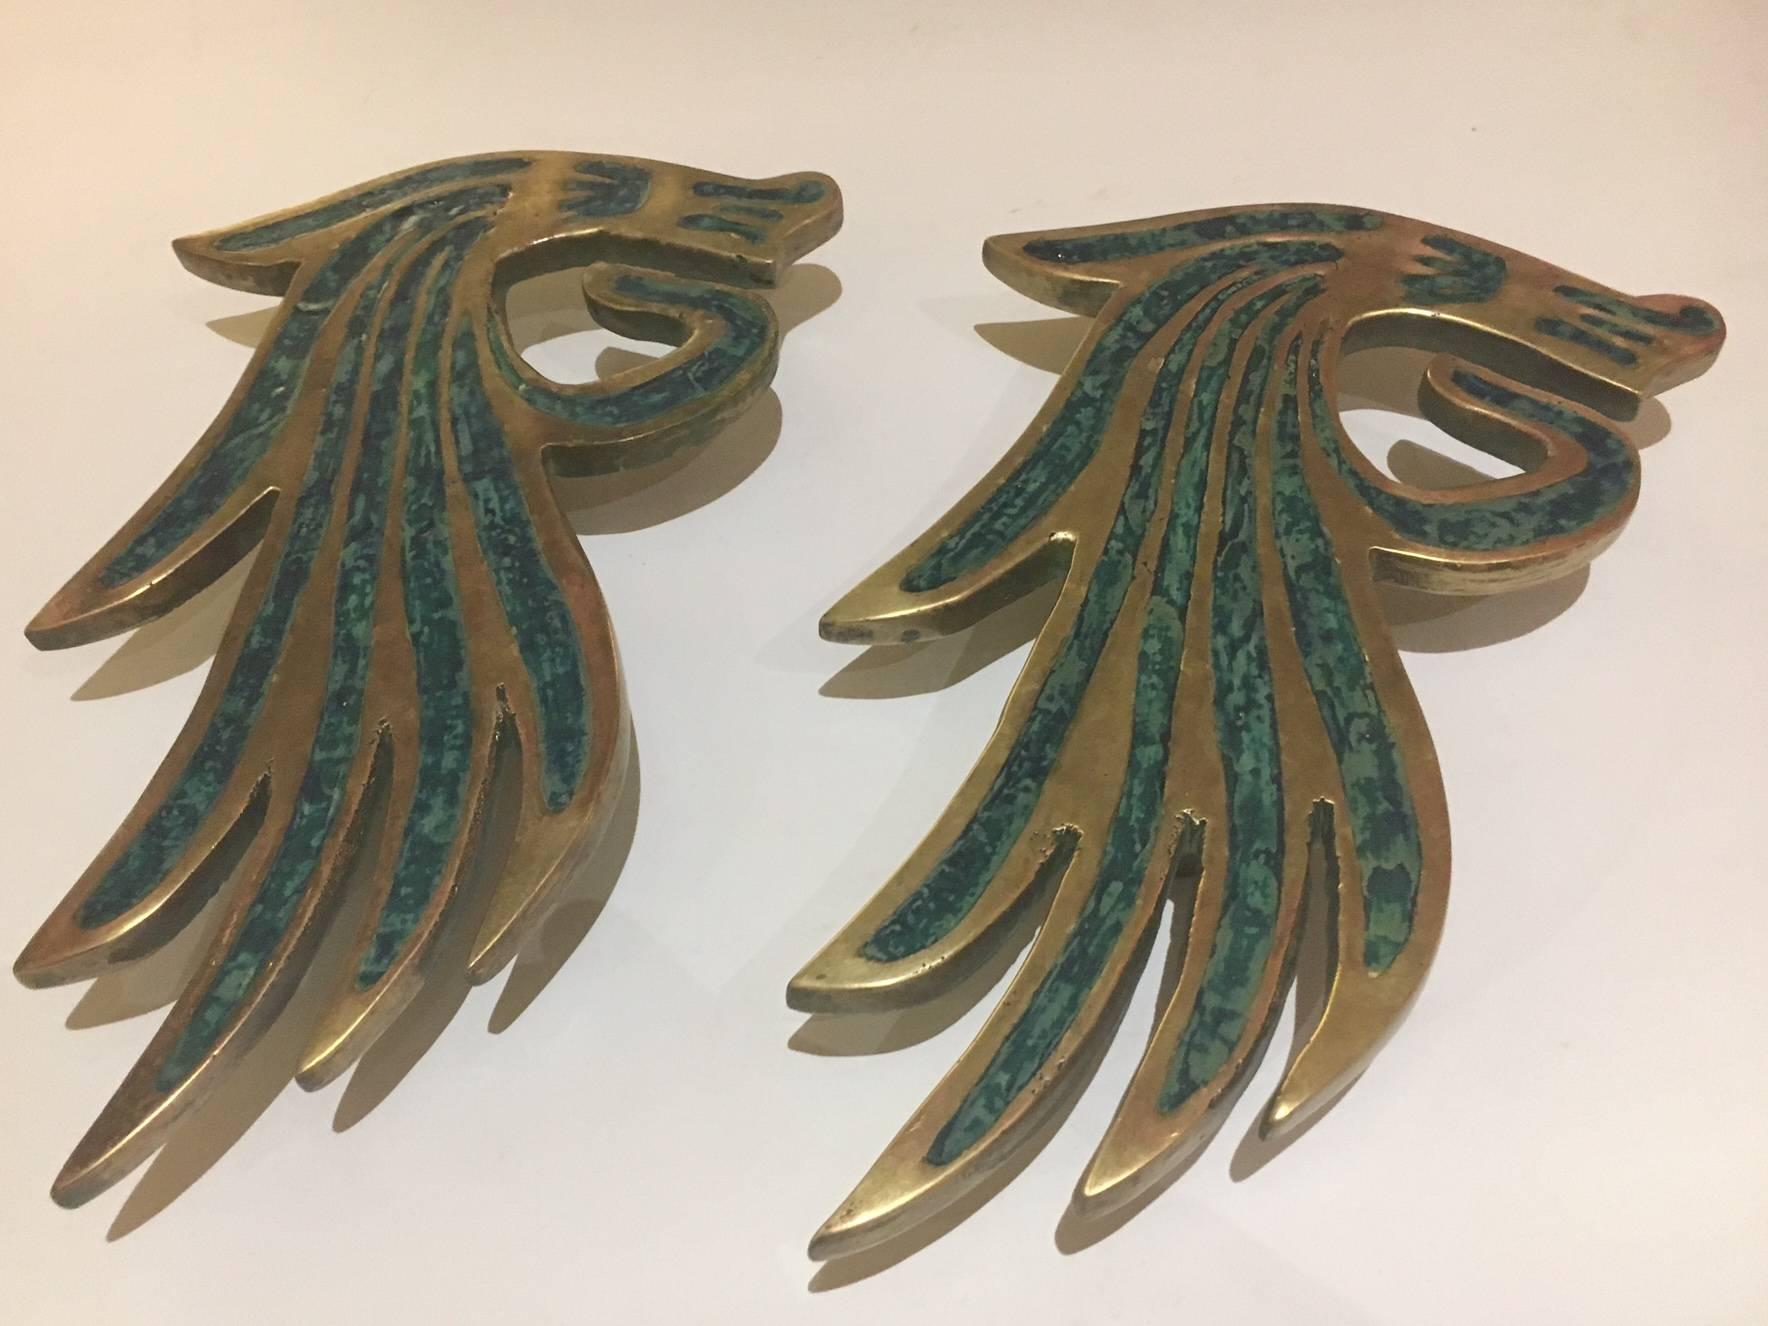 Cast Large Pepe Mendoza Door Pulls in Brass and Ceramic Inlay, Mexico, 1950s